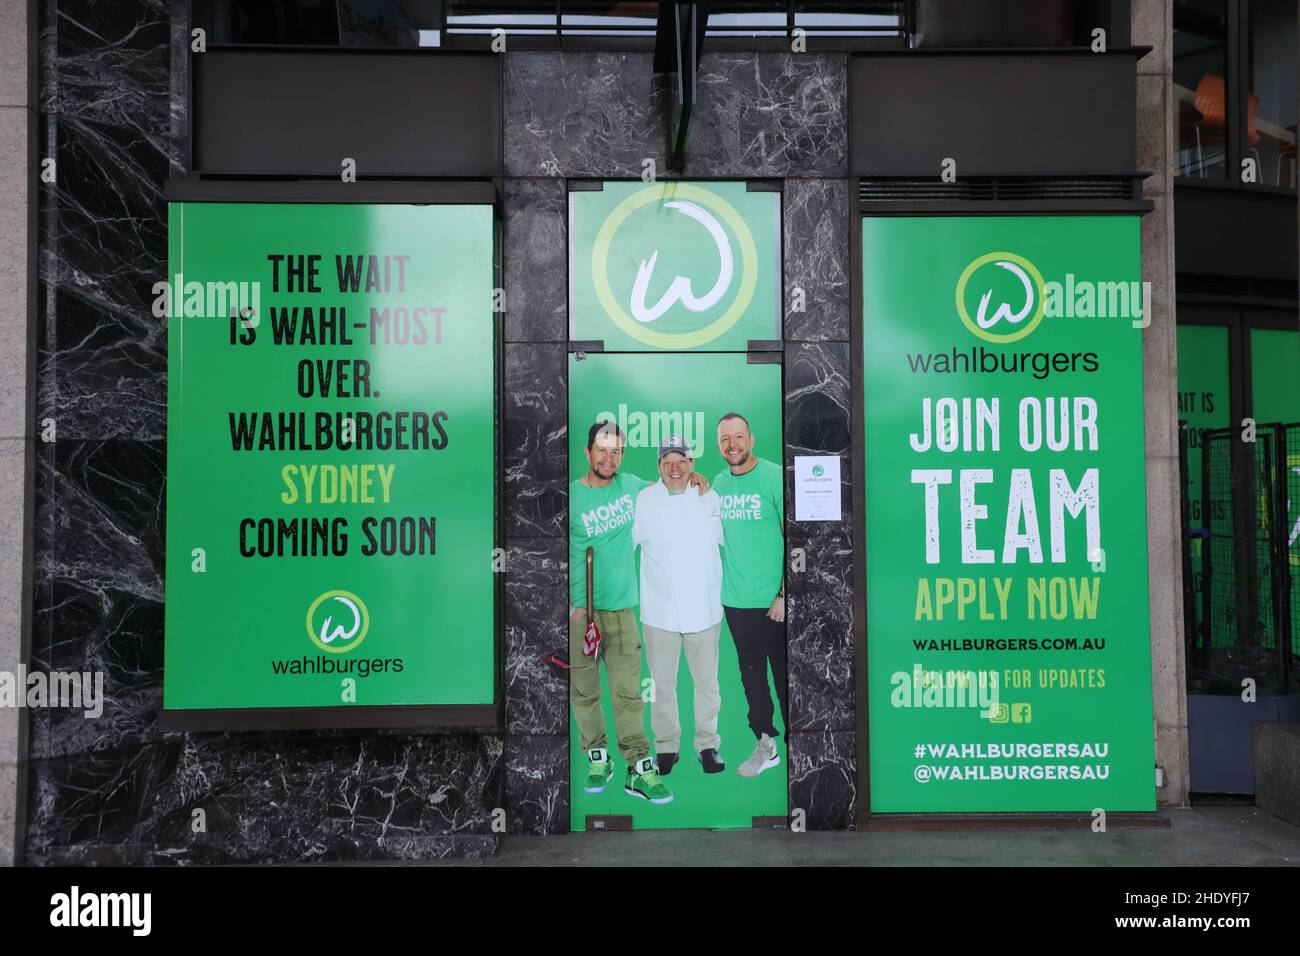 Hollywood star Mark Wahlberg's burger chain Wahlburgers is expected to open its first Australian store soon, located at 7 Macquarie Street, Opera Quay Stock Photo